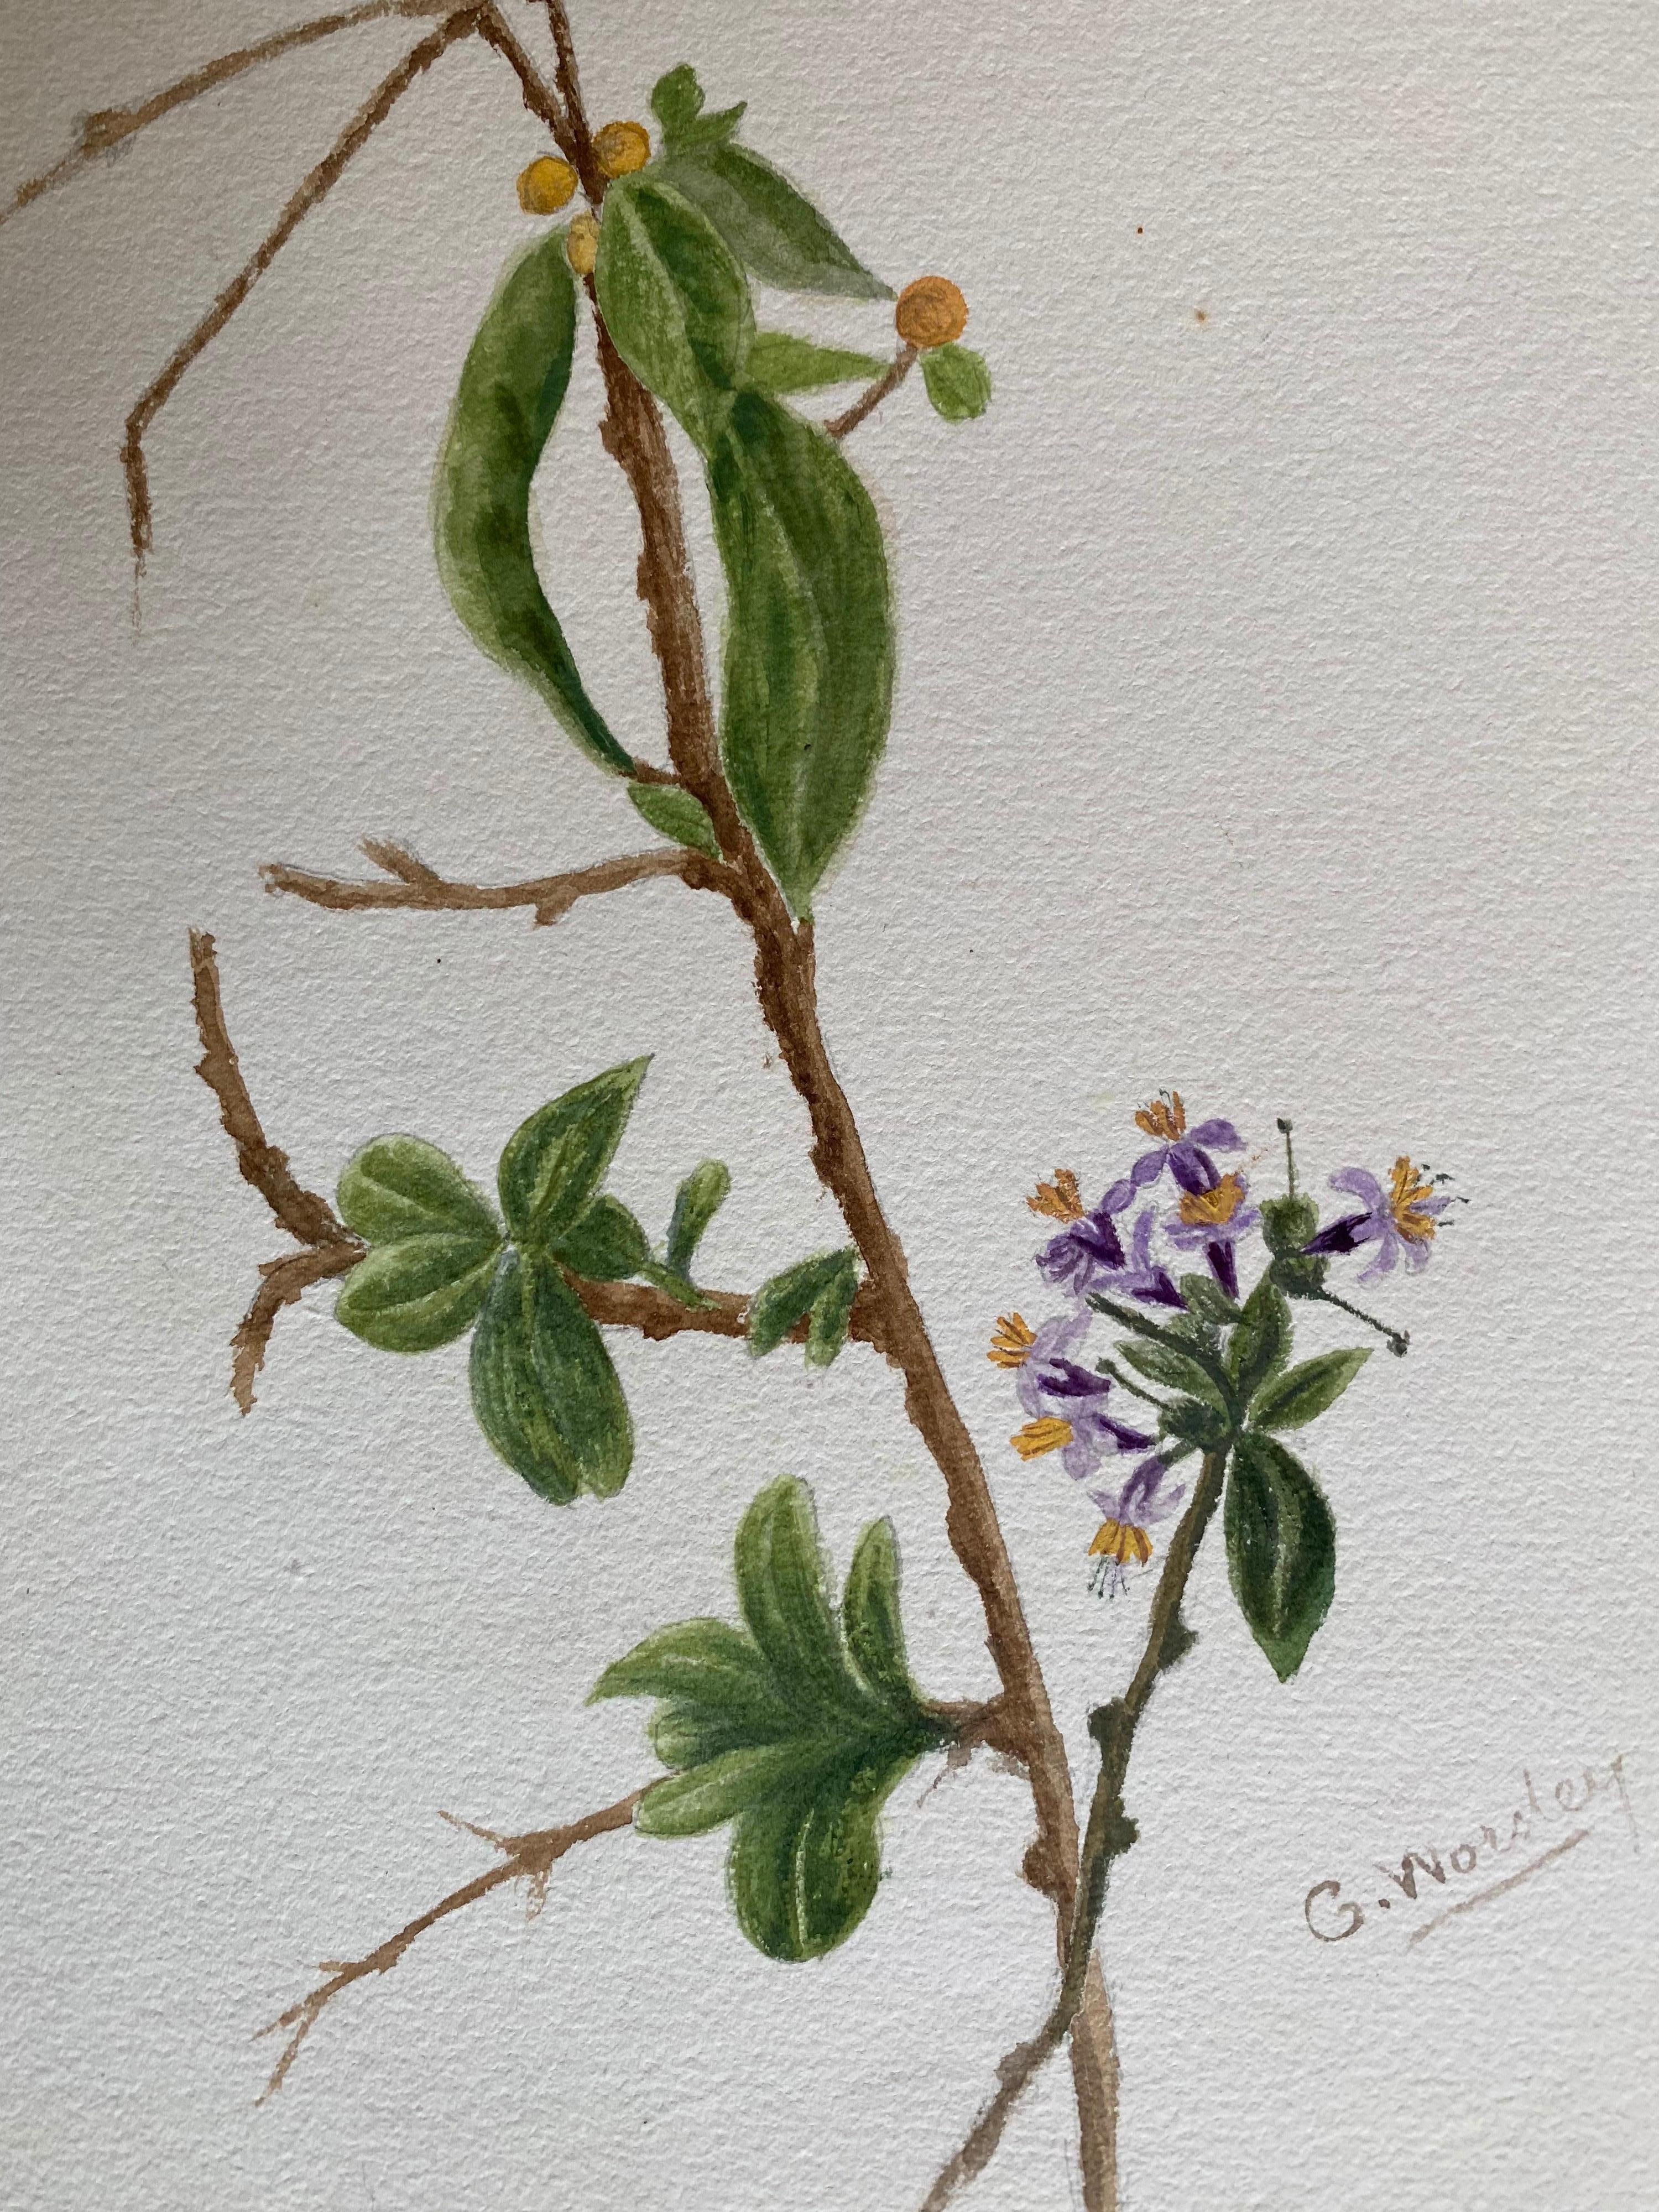 Two very fine original antique English botanical watercolor paintings depicting these beautiful depictions of flower/ plant. The works came to us from a private collection in Surrey, England and had been part of an album of works assembled by the